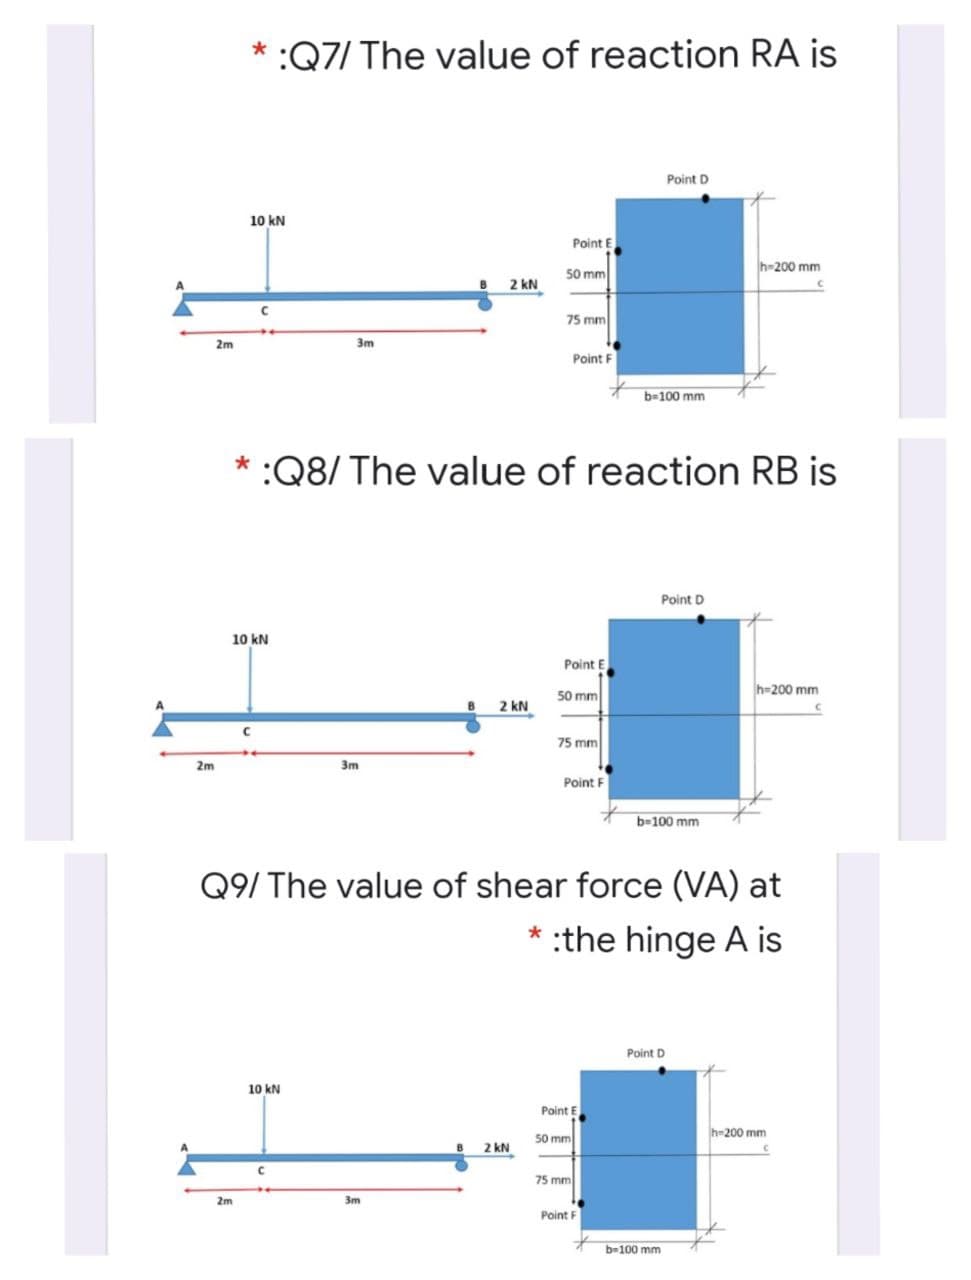 * :Q7/ The value of reaction RA is
Point D
10 kN
Point E
50 mm
h-200 mm
2 kN
75 mm
2m
3m
Point F
b=100 mm
:Q8/ The value of reaction RB is
Point D
10 kN
Point E
50 mm
h=200 mm
2 kN
75 mm
2m
3m
Point F
b-100 mm
Q9/ The value of shear force (VA) at
* :the hinge A is
Point D
10 kN
Point E
h-200 mm
50 mm
2 kN
75 mm
2m
3m
Point F
b-100 mm
